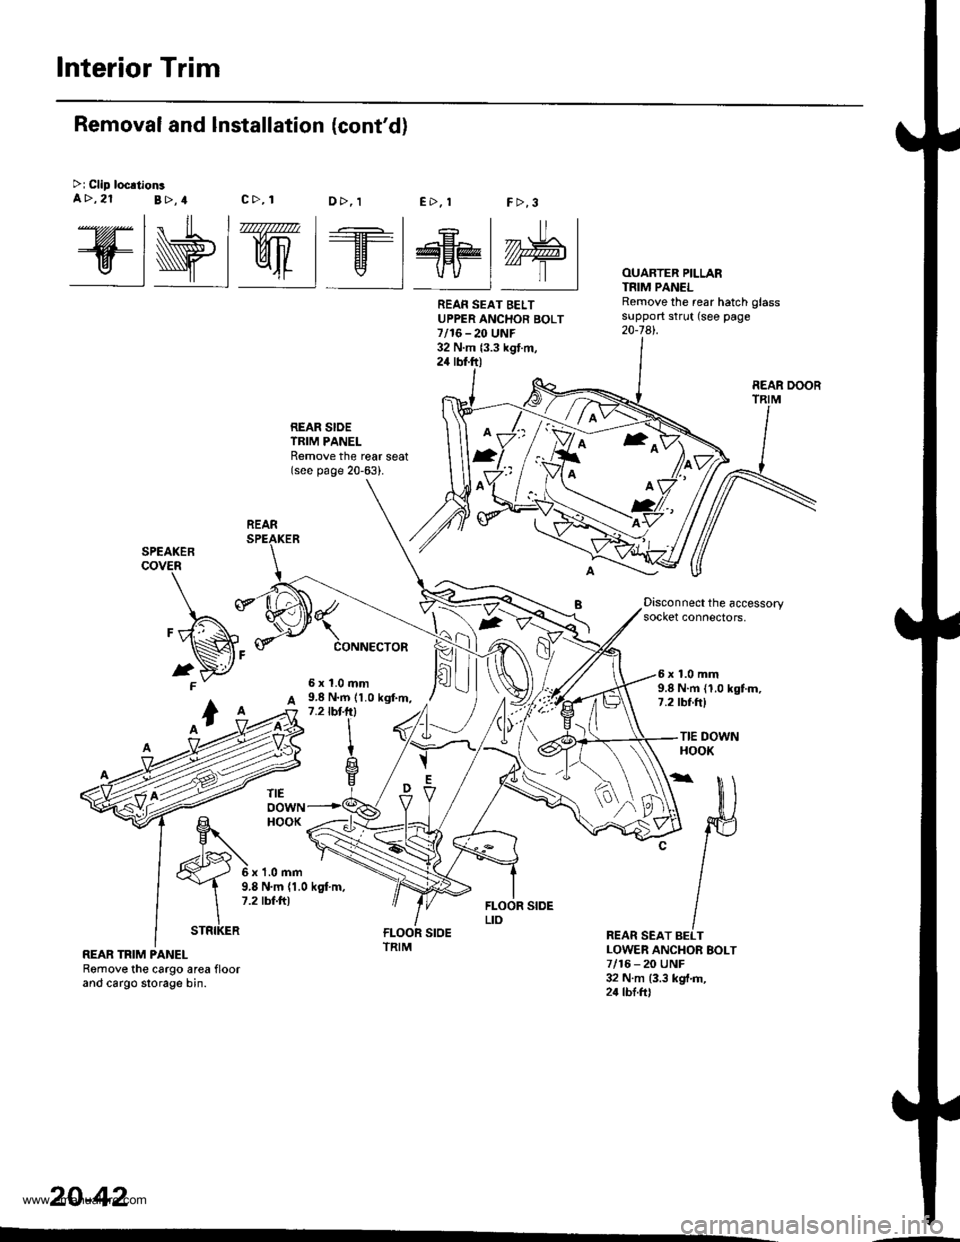 HONDA CR-V 2000 RD1-RD3 / 1.G Workshop Manual 
Interior Trim
@wt we@M
REAR SIOETRIM PANELRemove the reat seat(see page 20-63).
FCONNECTOR
2
OUARTER PILLARTNIM PANELRemove the rear hatch glasssupport strut (see page20-741.
Removal and Installation